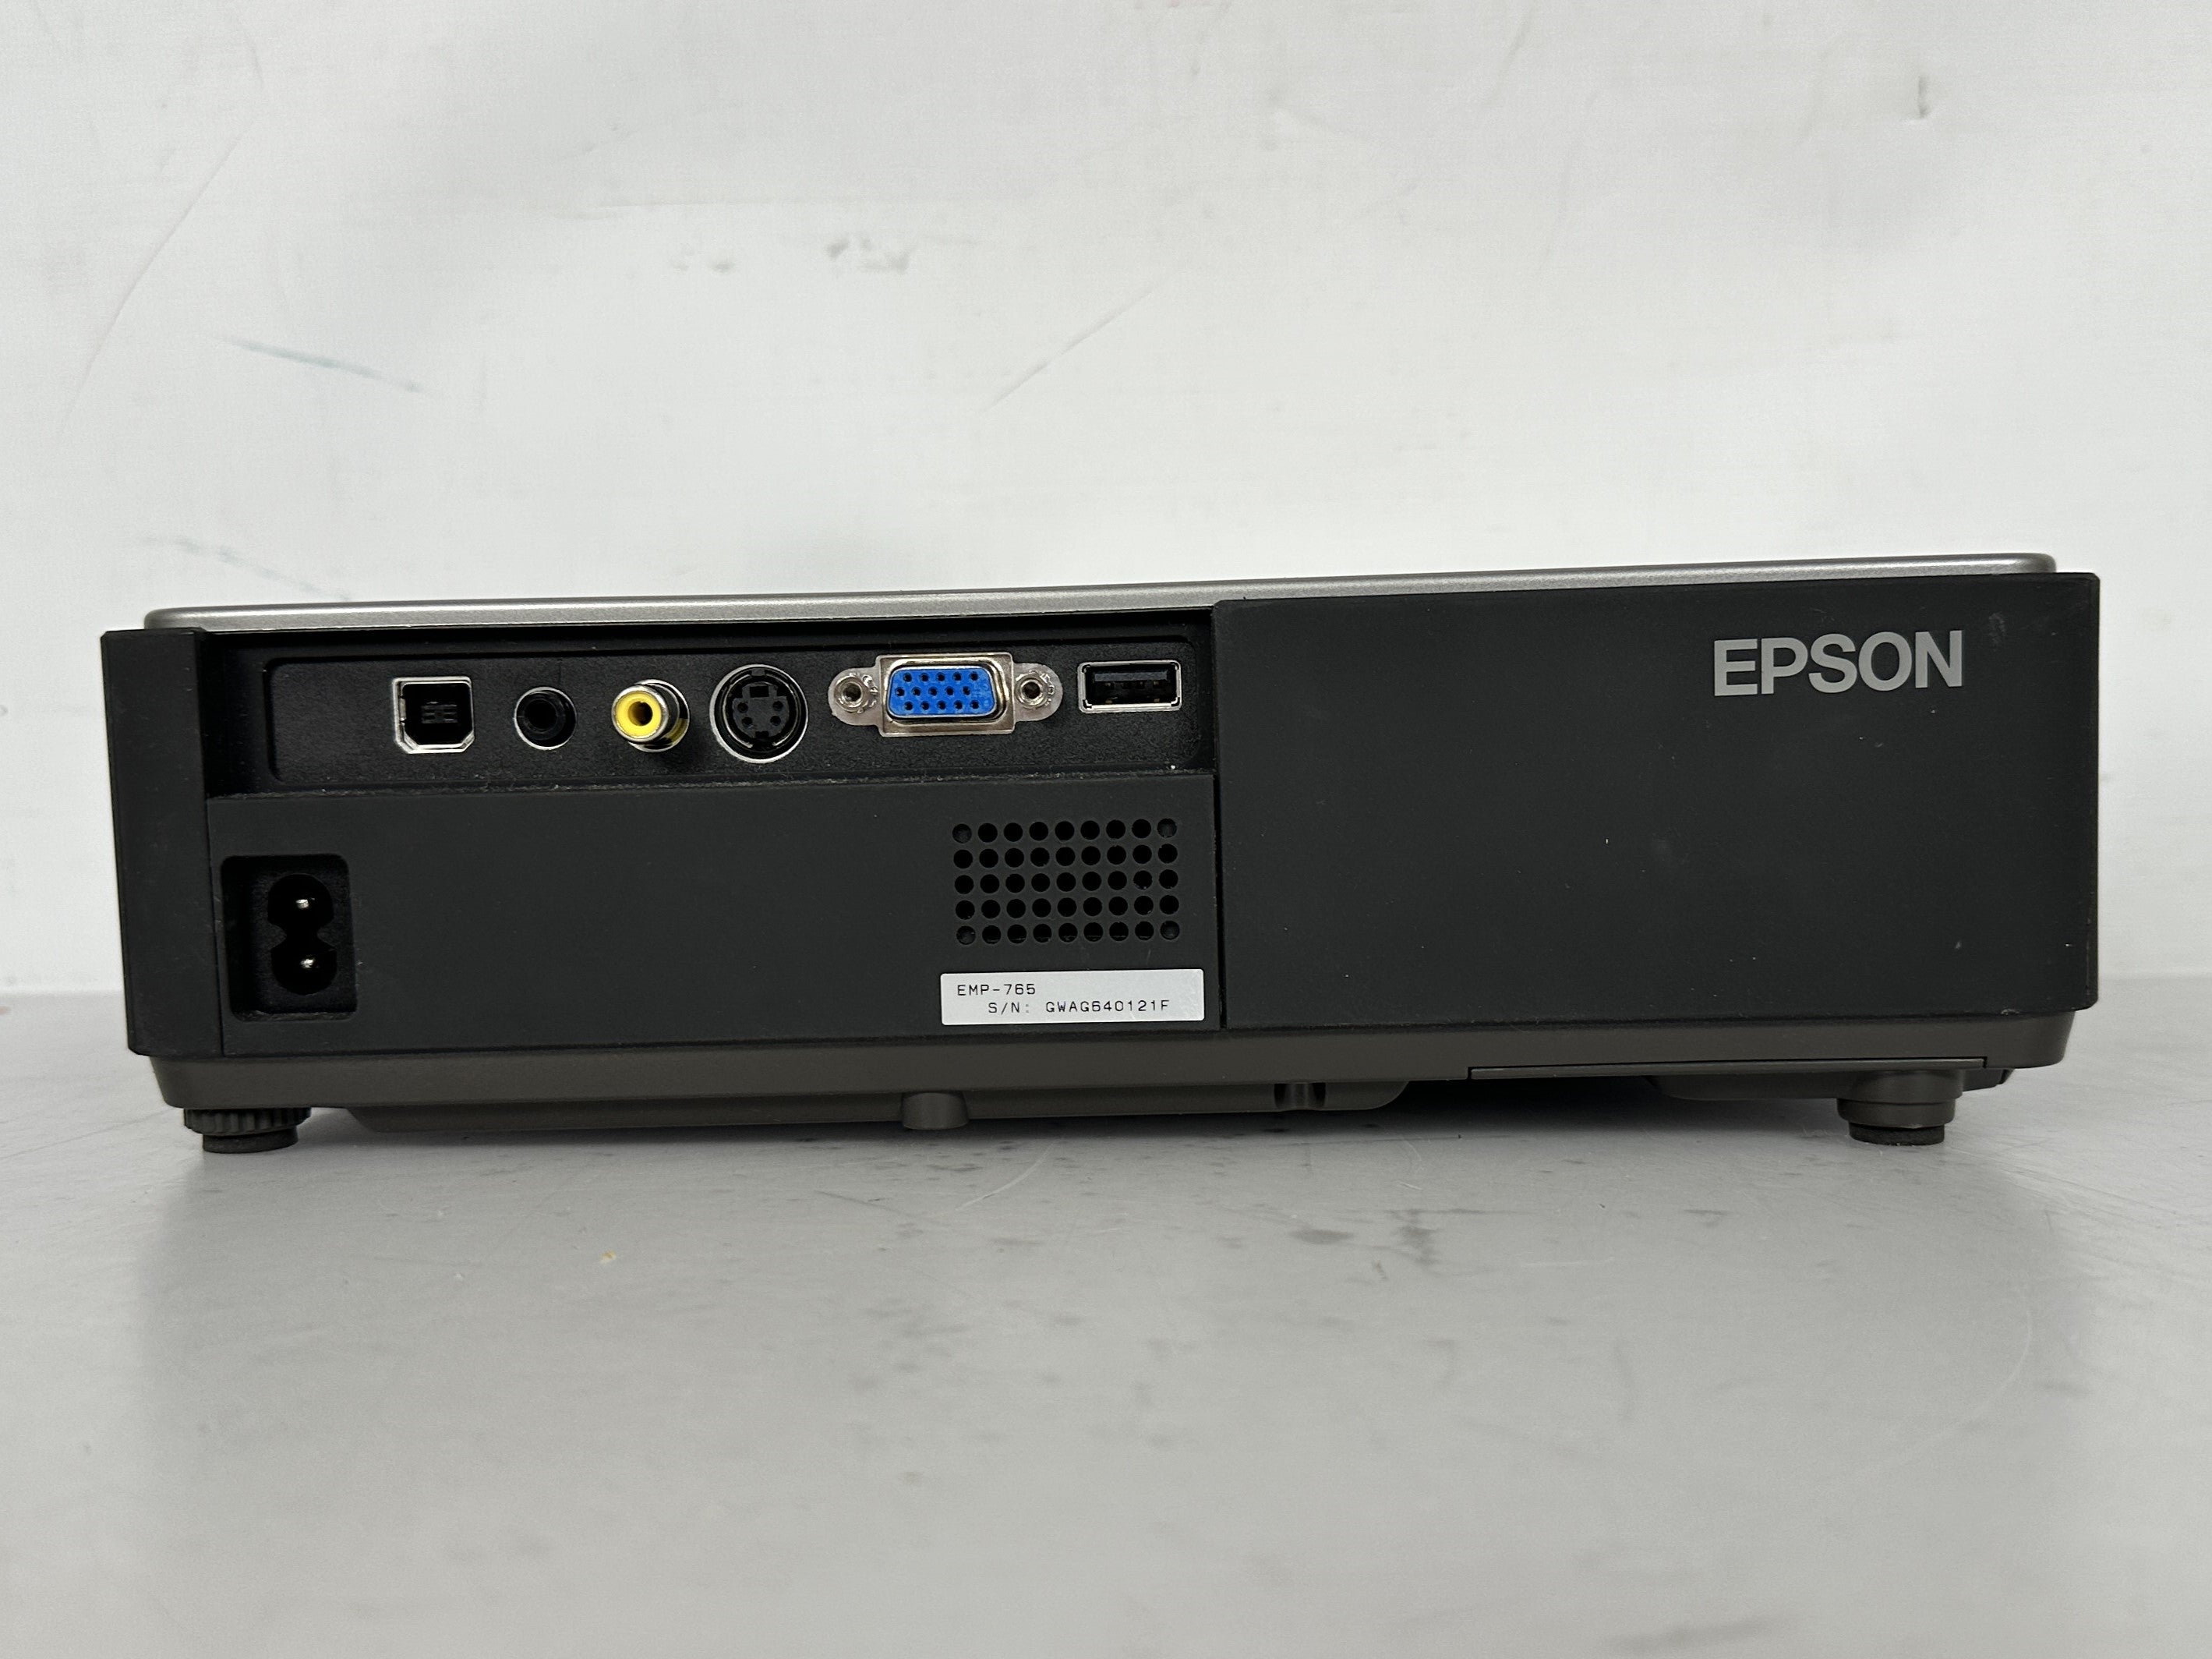 Epson Powerlite 765c LCD Projector w/ Manual & Carrying Case (236 Hours)